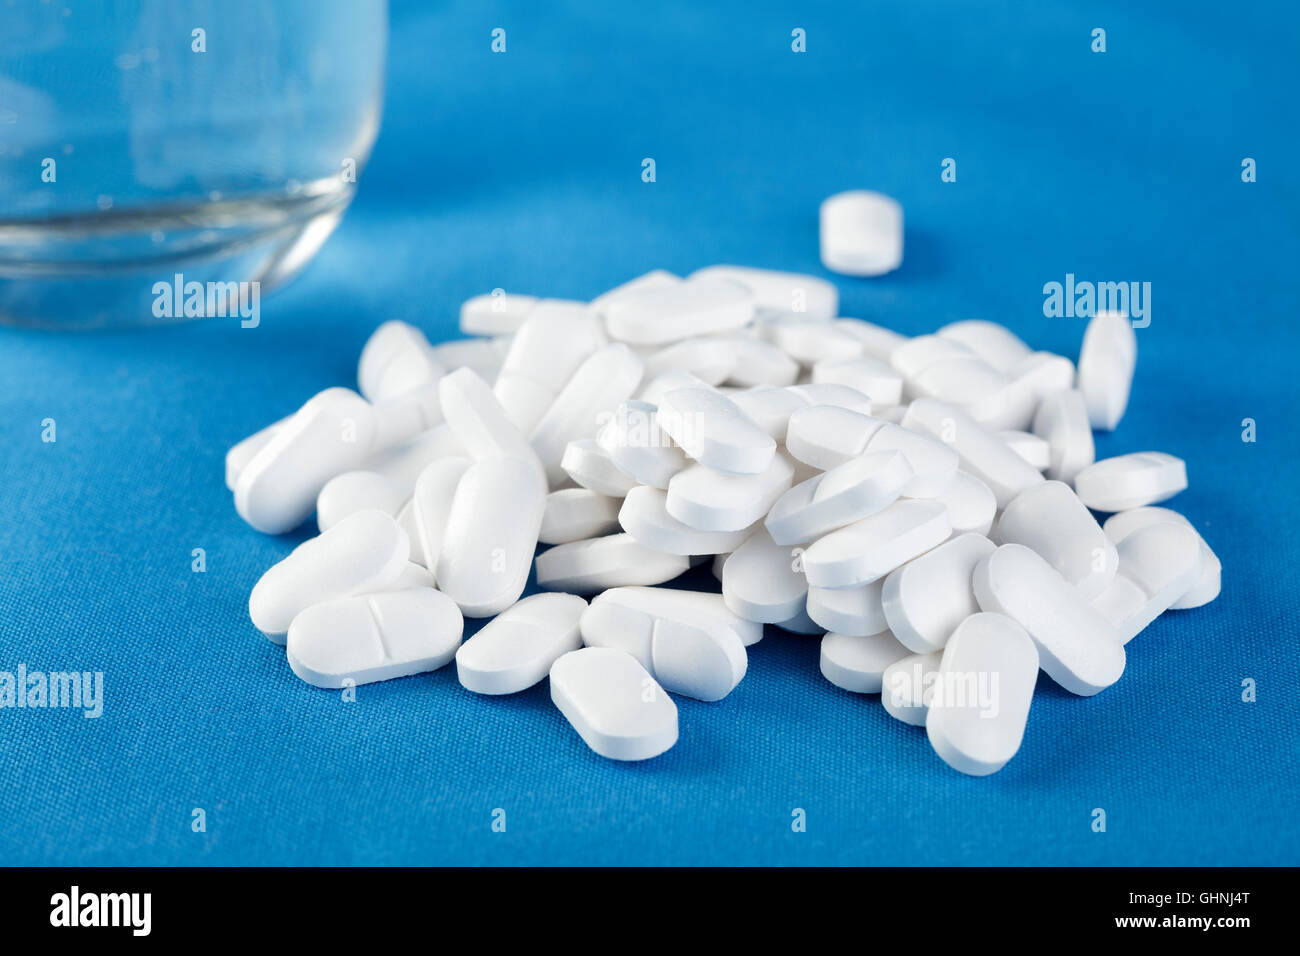 white tablets and glass of water on a blue background Stock Photo